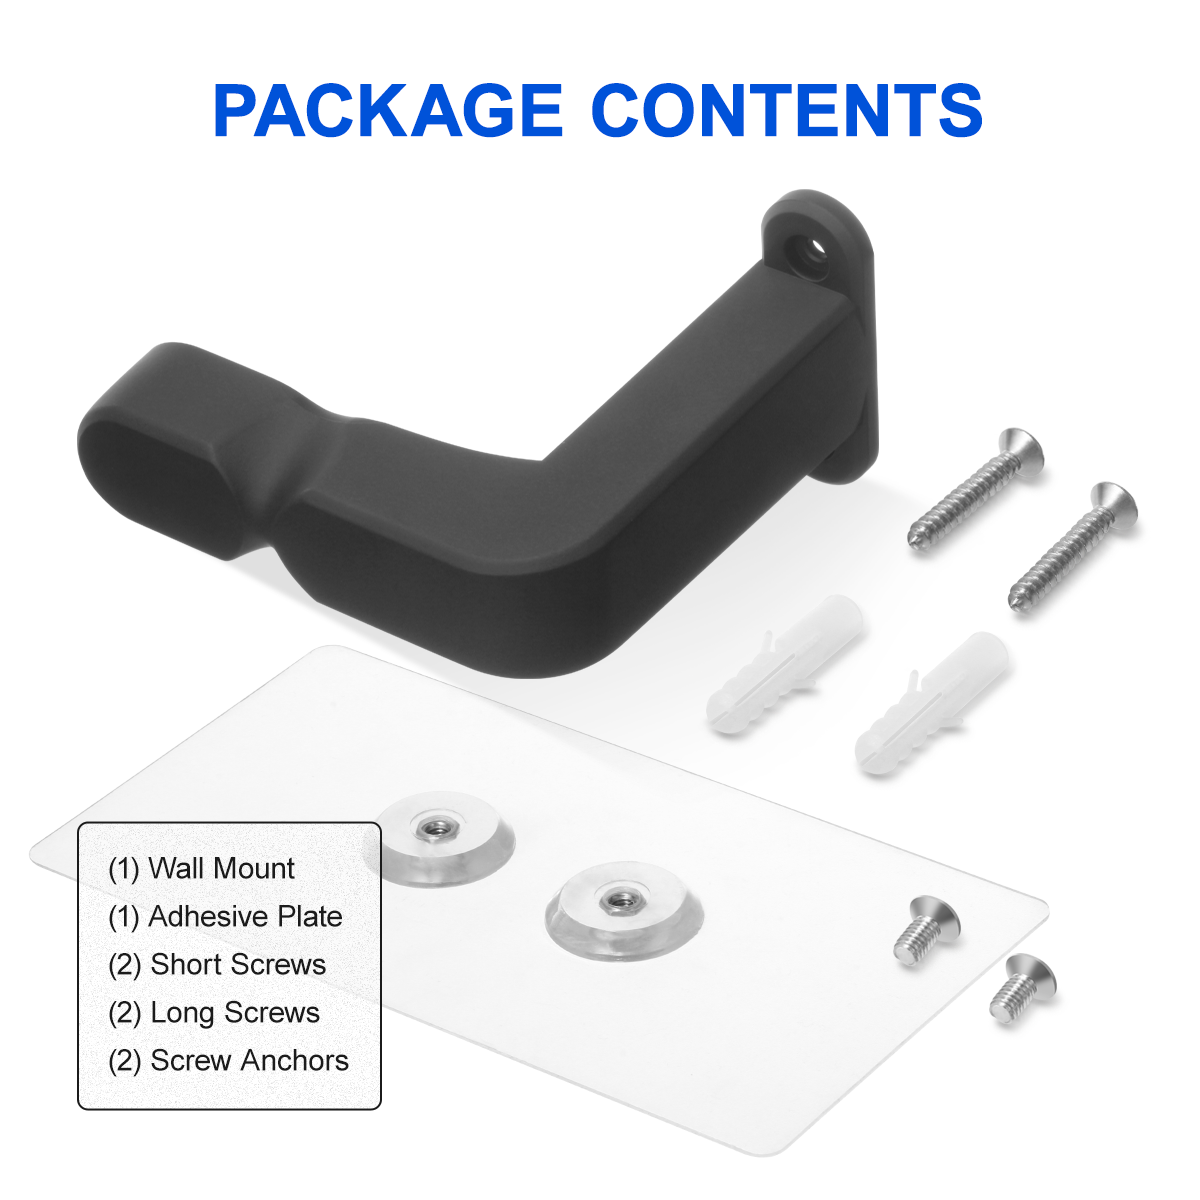 Wall Mount Holder package contents: wall mount, adhesive plate, short screws, long screws,screw anchors 